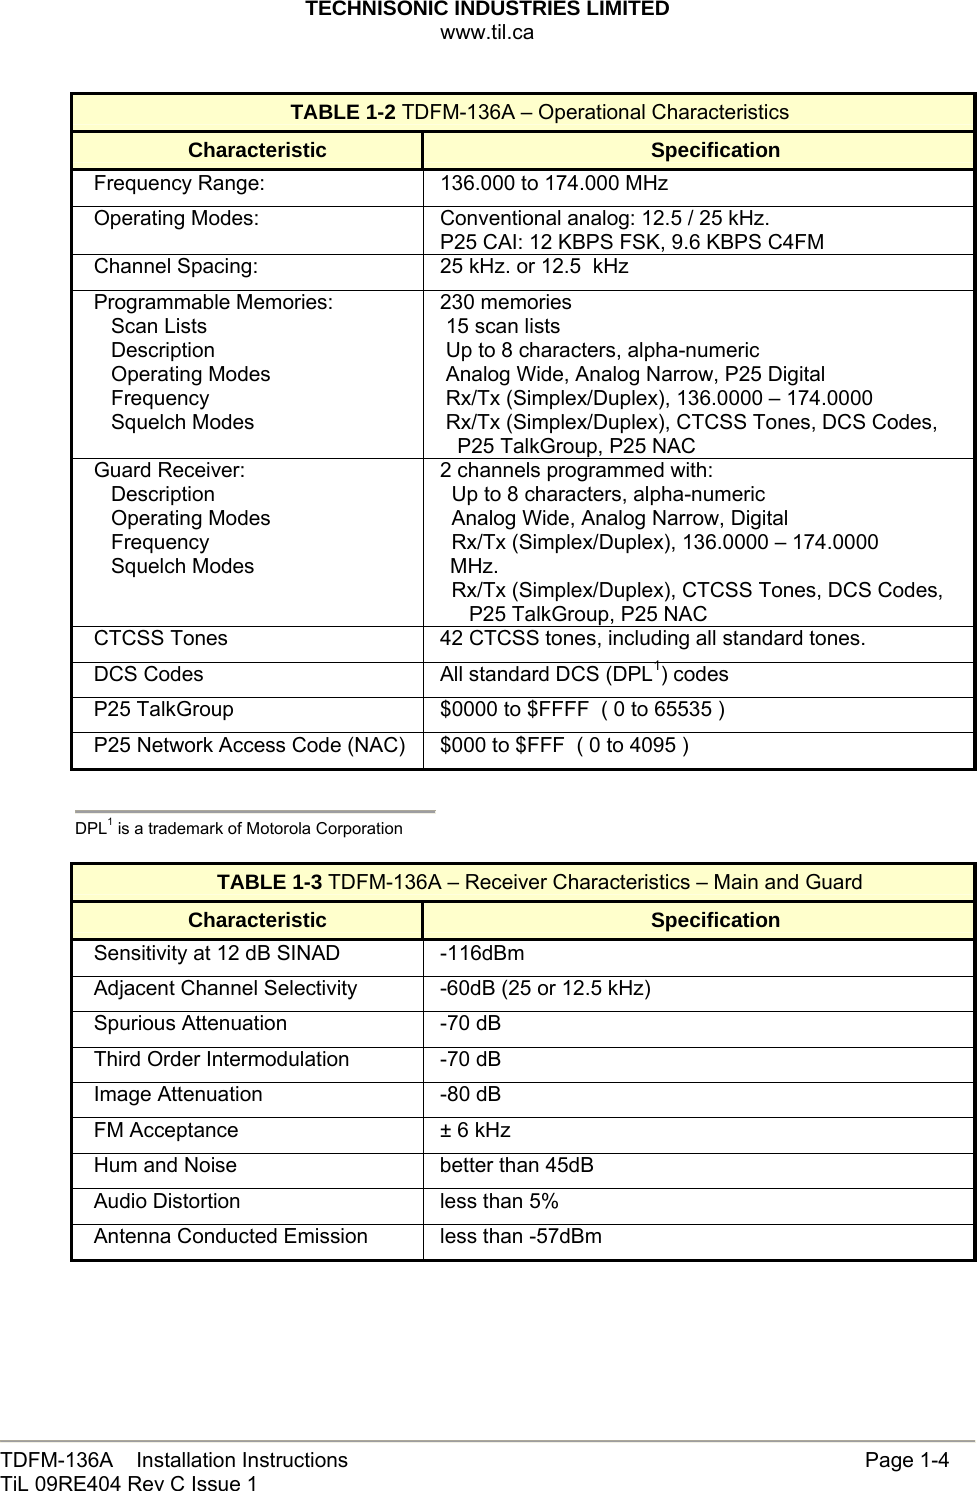 TECHNISONIC INDUSTRIES LIMITED www.til.ca   TDFM-136A    Installation Instructions                     Page 1-4 TiL 09RE404 Rev C Issue 1  TABLE 1-2 TDFM-136A – Operational Characteristics Characteristic  Specification Frequency Range:  136.000 to 174.000 MHz Operating Modes:  Conventional analog: 12.5 / 25 kHz. P25 CAI: 12 KBPS FSK, 9.6 KBPS C4FM Channel Spacing:  25 kHz. or 12.5  kHz Programmable Memories:    Scan Lists    Description    Operating Modes    Frequency    Squelch Modes 230 memories  15 scan lists  Up to 8 characters, alpha-numeric   Analog Wide, Analog Narrow, P25 Digital  Rx/Tx (Simplex/Duplex), 136.0000 – 174.0000  Rx/Tx (Simplex/Duplex), CTCSS Tones, DCS Codes,    P25 TalkGroup, P25 NAC Guard Receiver:    Description    Operating Modes    Frequency    Squelch Modes 2 channels programmed with:   Up to 8 characters, alpha-numeric    Analog Wide, Analog Narrow, Digital   Rx/Tx (Simplex/Duplex), 136.0000 – 174.0000 MHz.   Rx/Tx (Simplex/Duplex), CTCSS Tones, DCS Codes,      P25 TalkGroup, P25 NAC CTCSS Tones  42 CTCSS tones, including all standard tones. DCS Codes  All standard DCS (DPL1) codes P25 TalkGroup  $0000 to $FFFF  ( 0 to 65535 )  P25 Network Access Code (NAC)  $000 to $FFF  ( 0 to 4095 )   DPL1 is a trademark of Motorola Corporation  TABLE 1-3 TDFM-136A – Receiver Characteristics – Main and Guard Characteristic  Specification Sensitivity at 12 dB SINAD  -116dBm Adjacent Channel Selectivity  -60dB (25 or 12.5 kHz) Spurious Attenuation  -70 dB Third Order Intermodulation  -70 dB Image Attenuation  -80 dB FM Acceptance   ± 6 kHz Hum and Noise  better than 45dB Audio Distortion  less than 5% Antenna Conducted Emission  less than -57dBm     